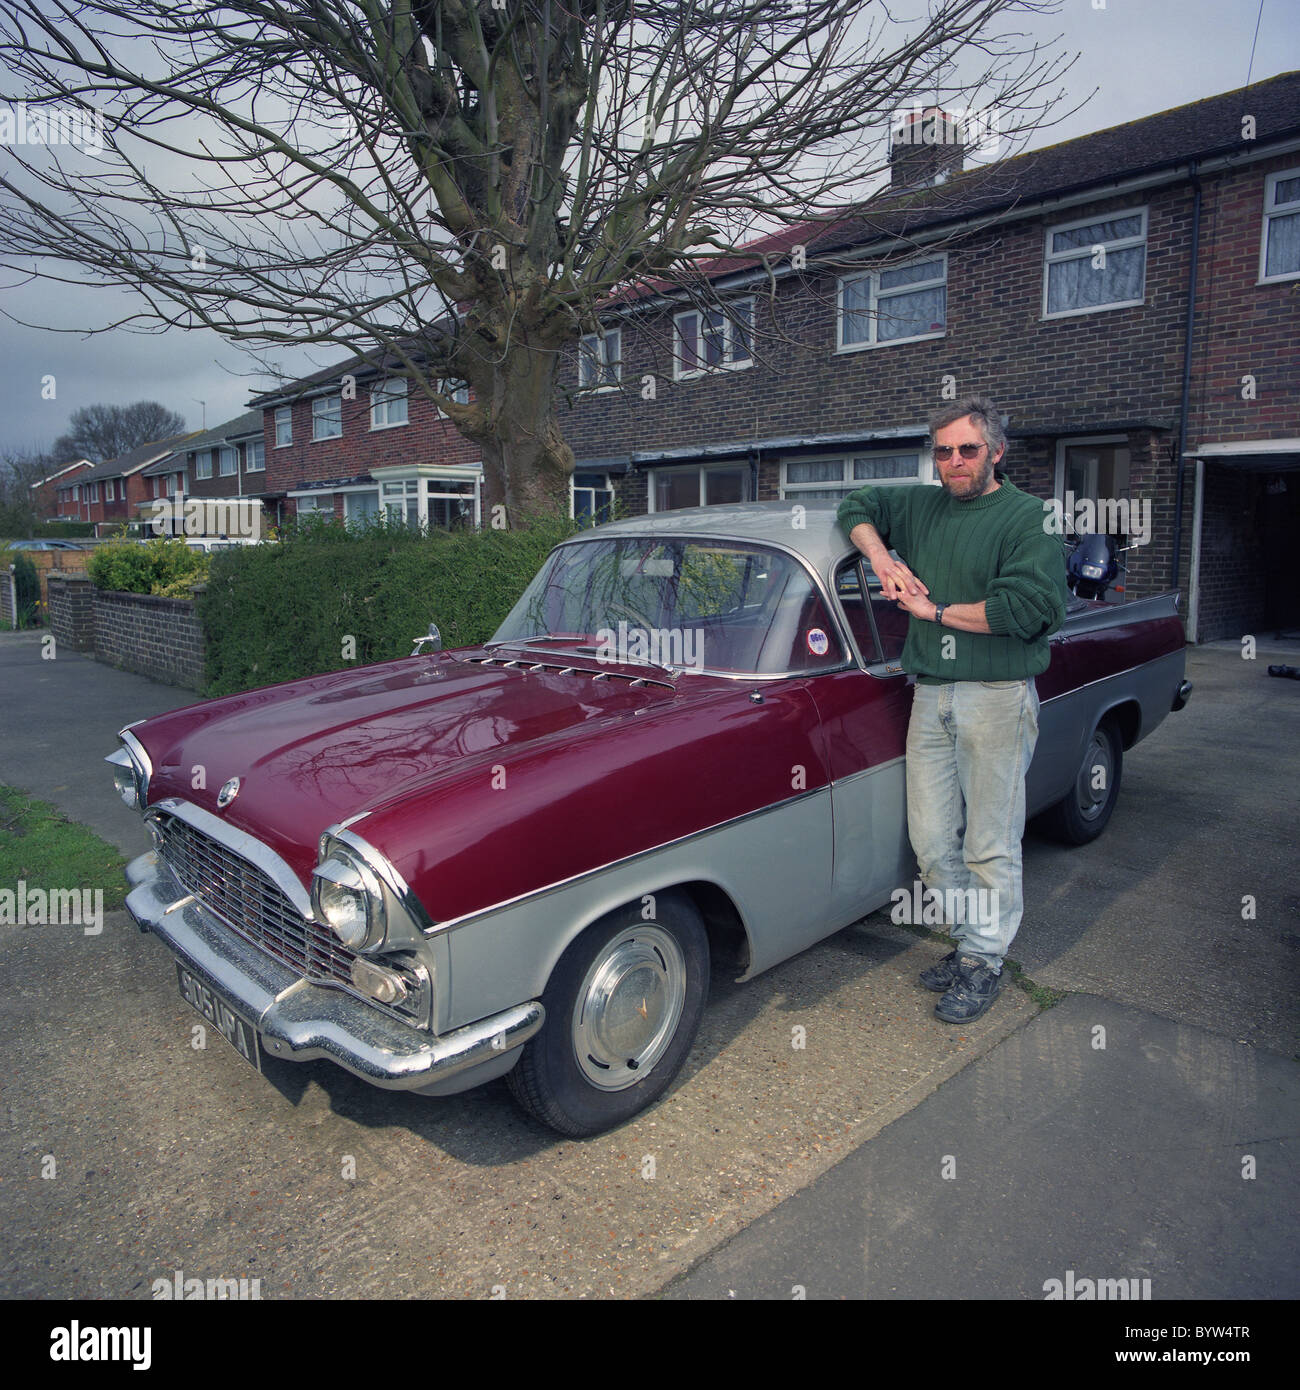 1960s Vauxhall Cresta and owner, Yapton, West Sussex, UK Stock Photo